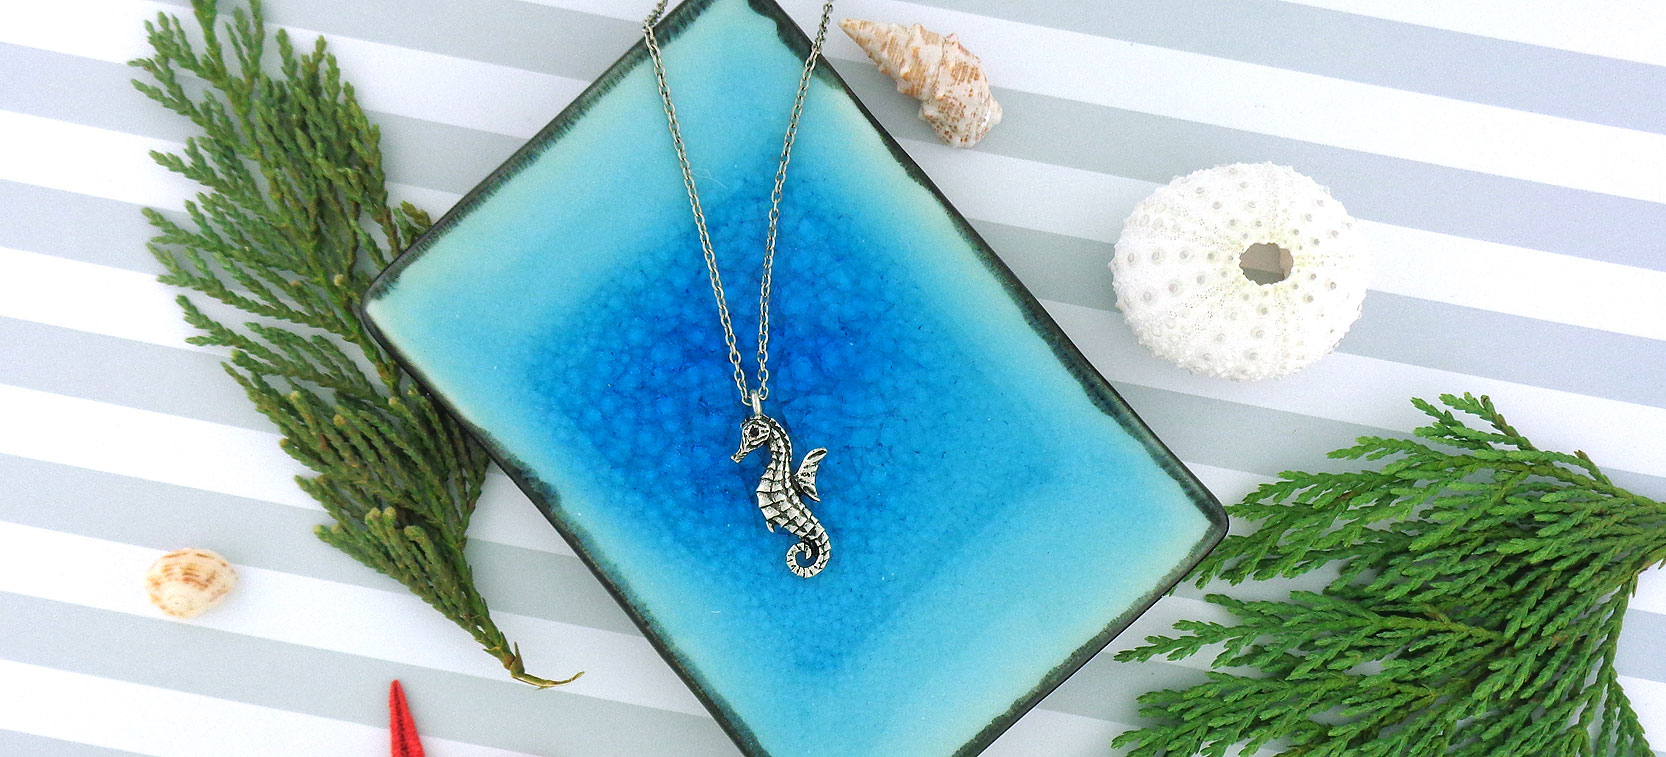 LAVISHY design and wholesale seahorse themed vegan accessories and gfits to gift shops, boutiques and book stores in Canada, USA and worldwide.